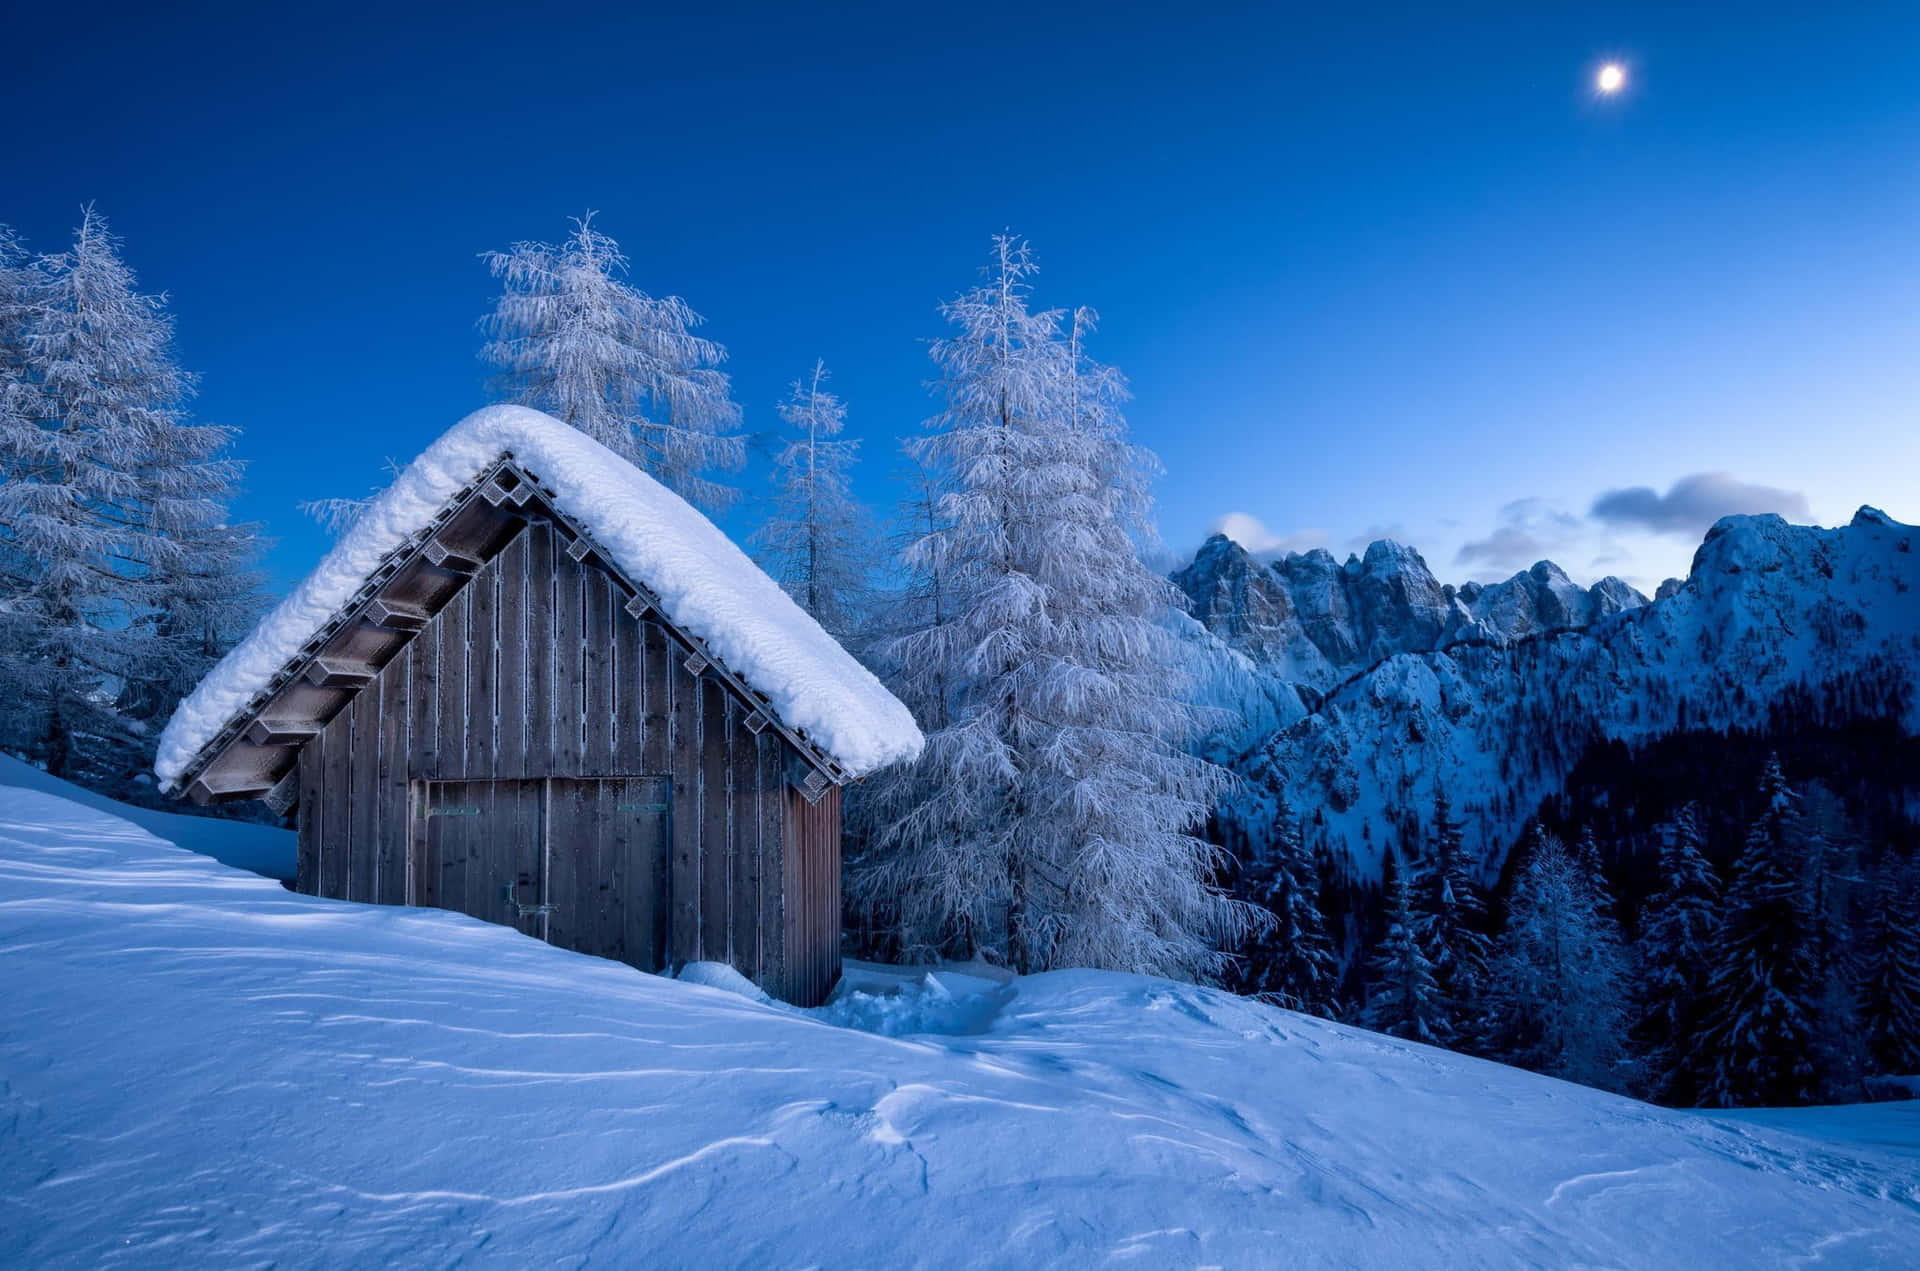 "Rustic Hut Nestled in an Untouched Wilderness"